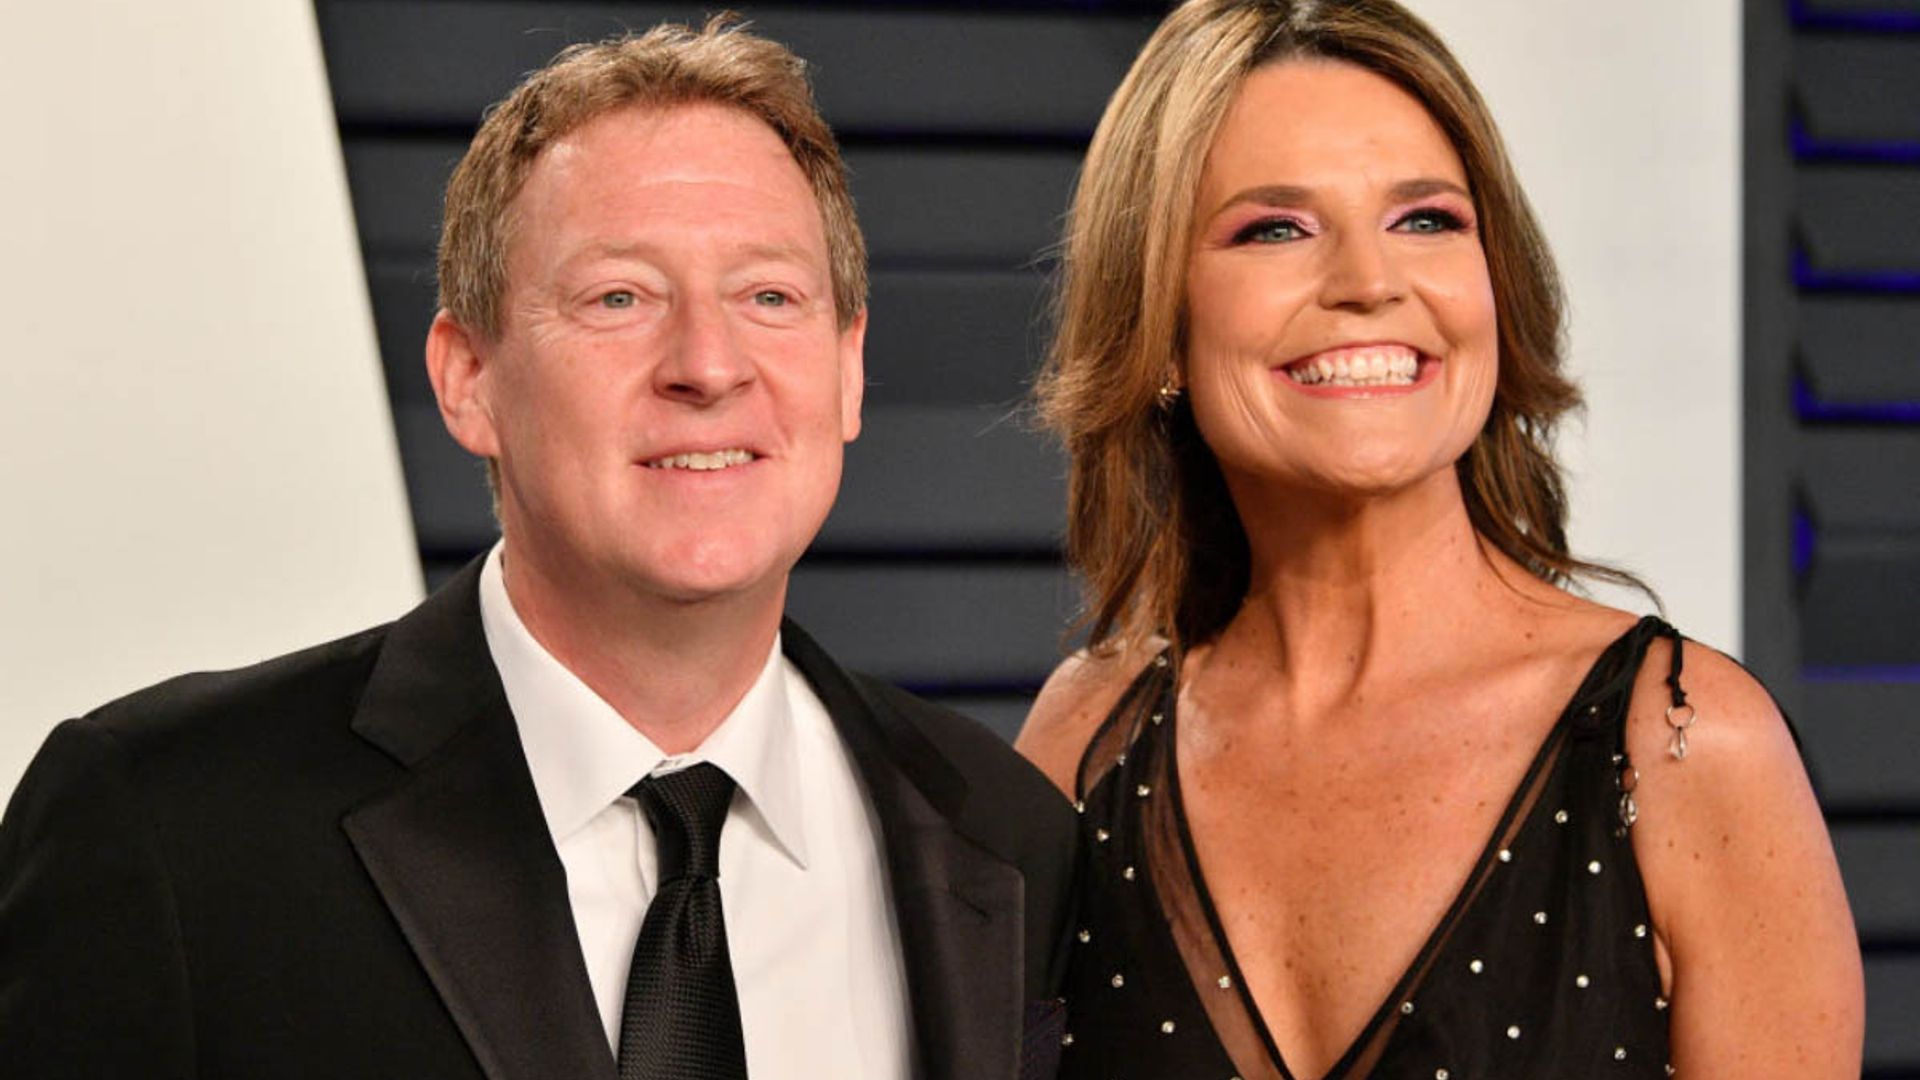 Today's Savannah Guthrie reveals she broke up with husband in drastic